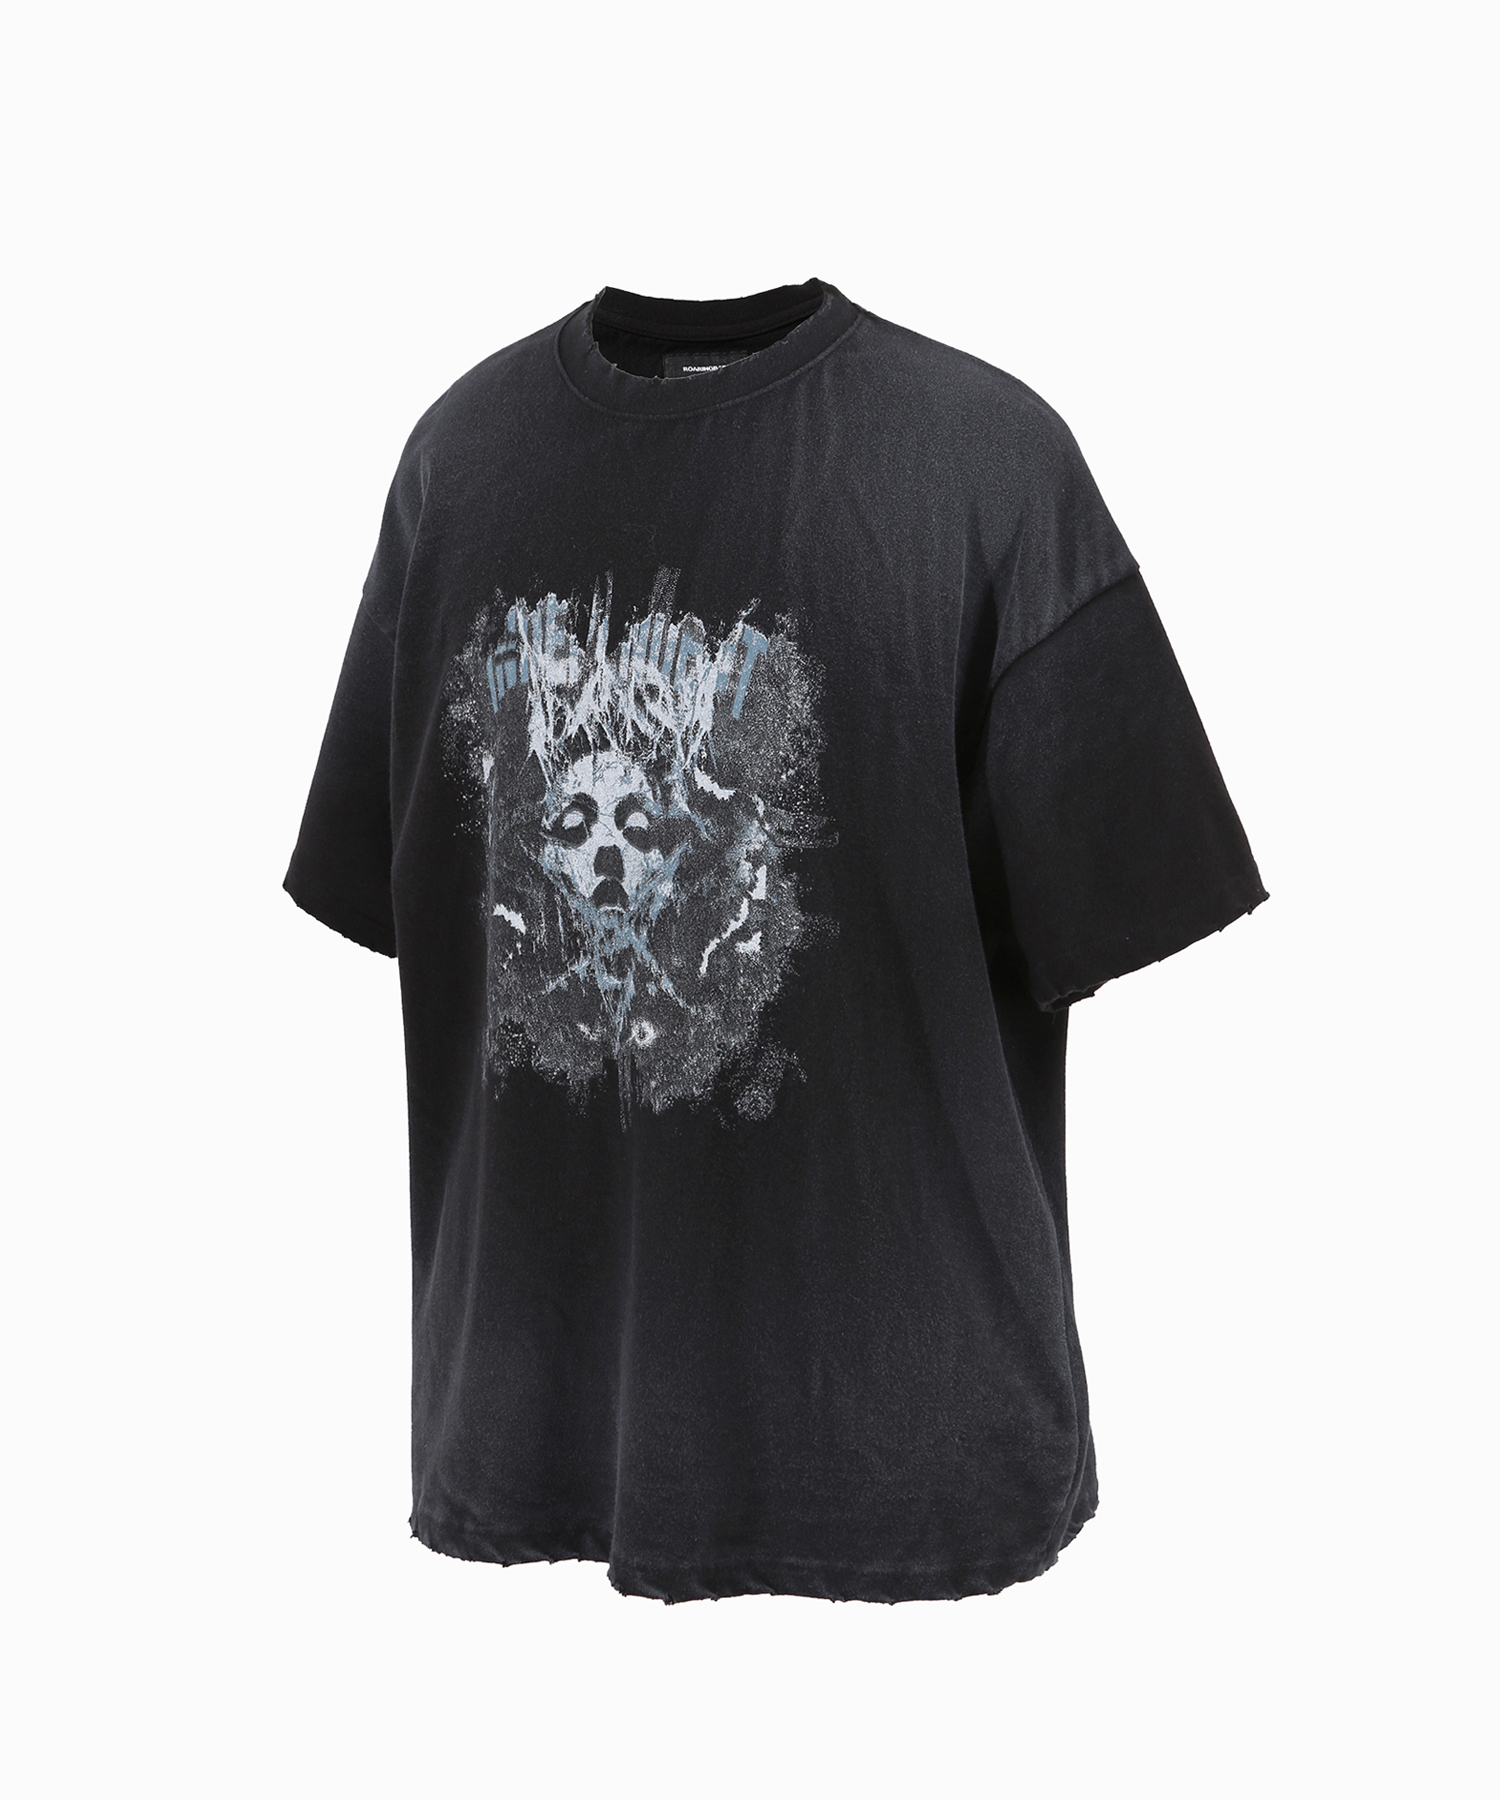 Independent washed over t-shirt-Dirty black - 로어링라드(ROARINGRAD)